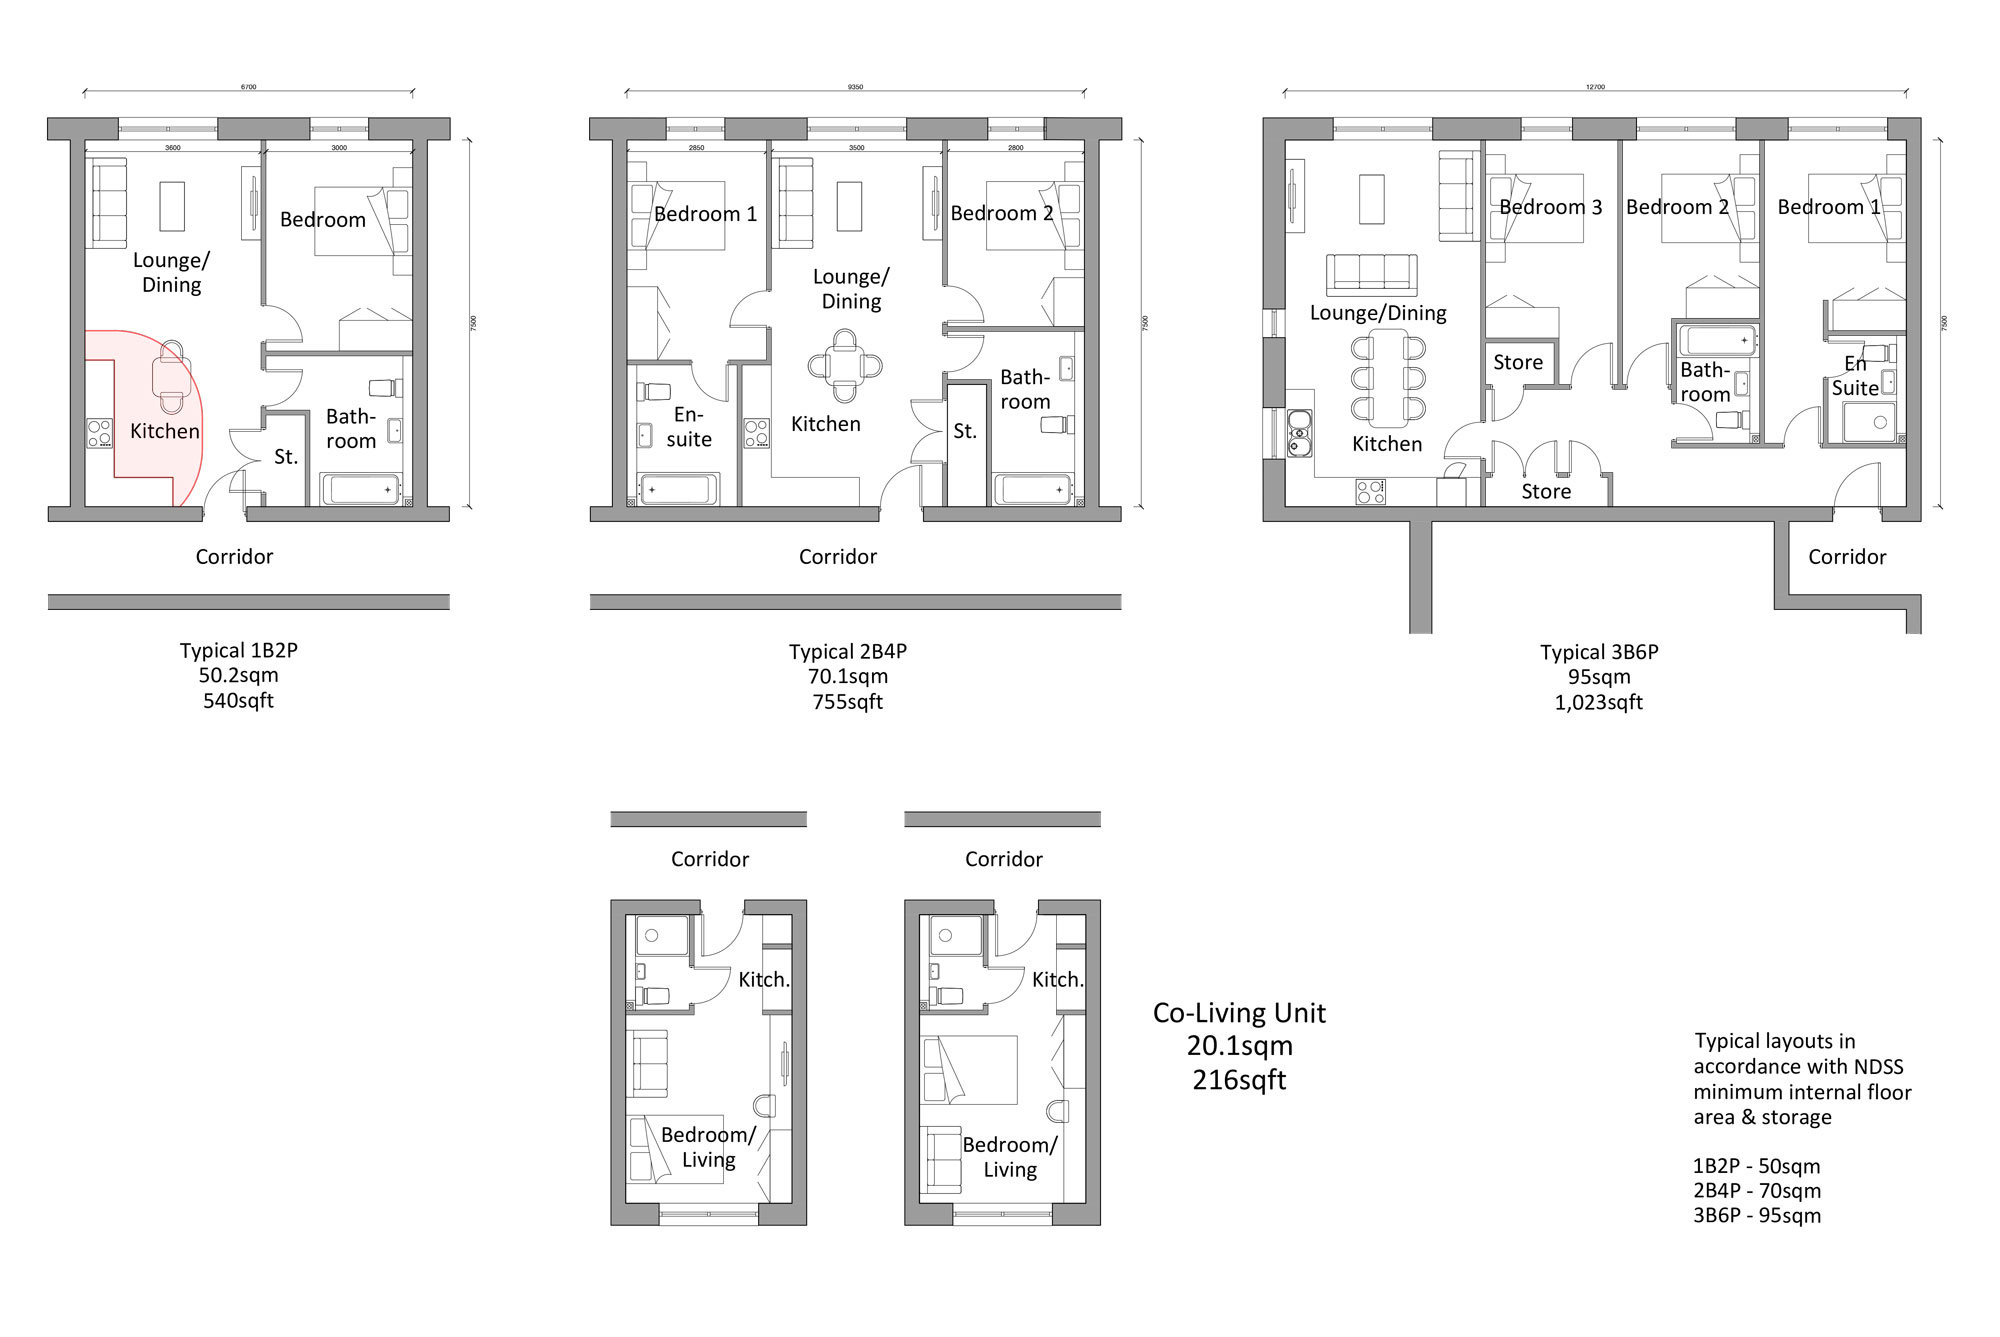 Typical apartment layouts